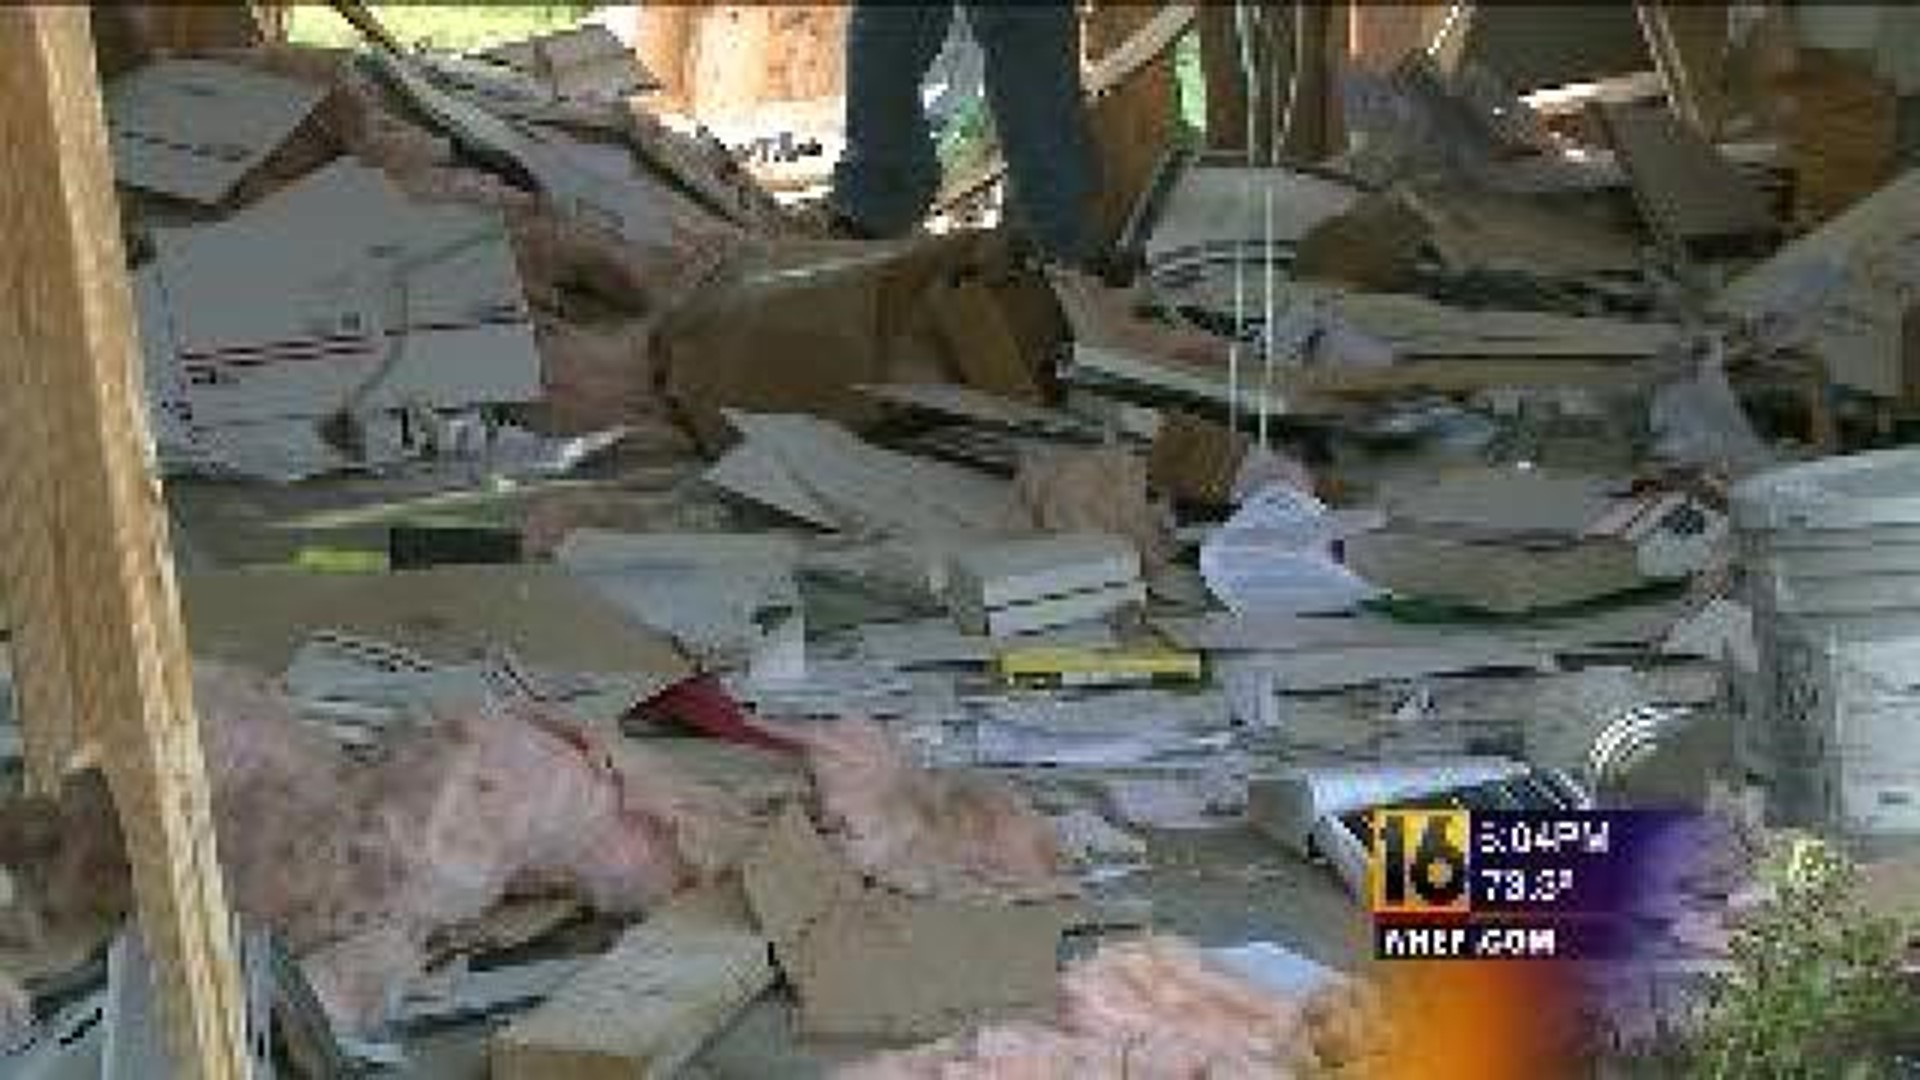 Camptown Post Office Likely a Total Loss